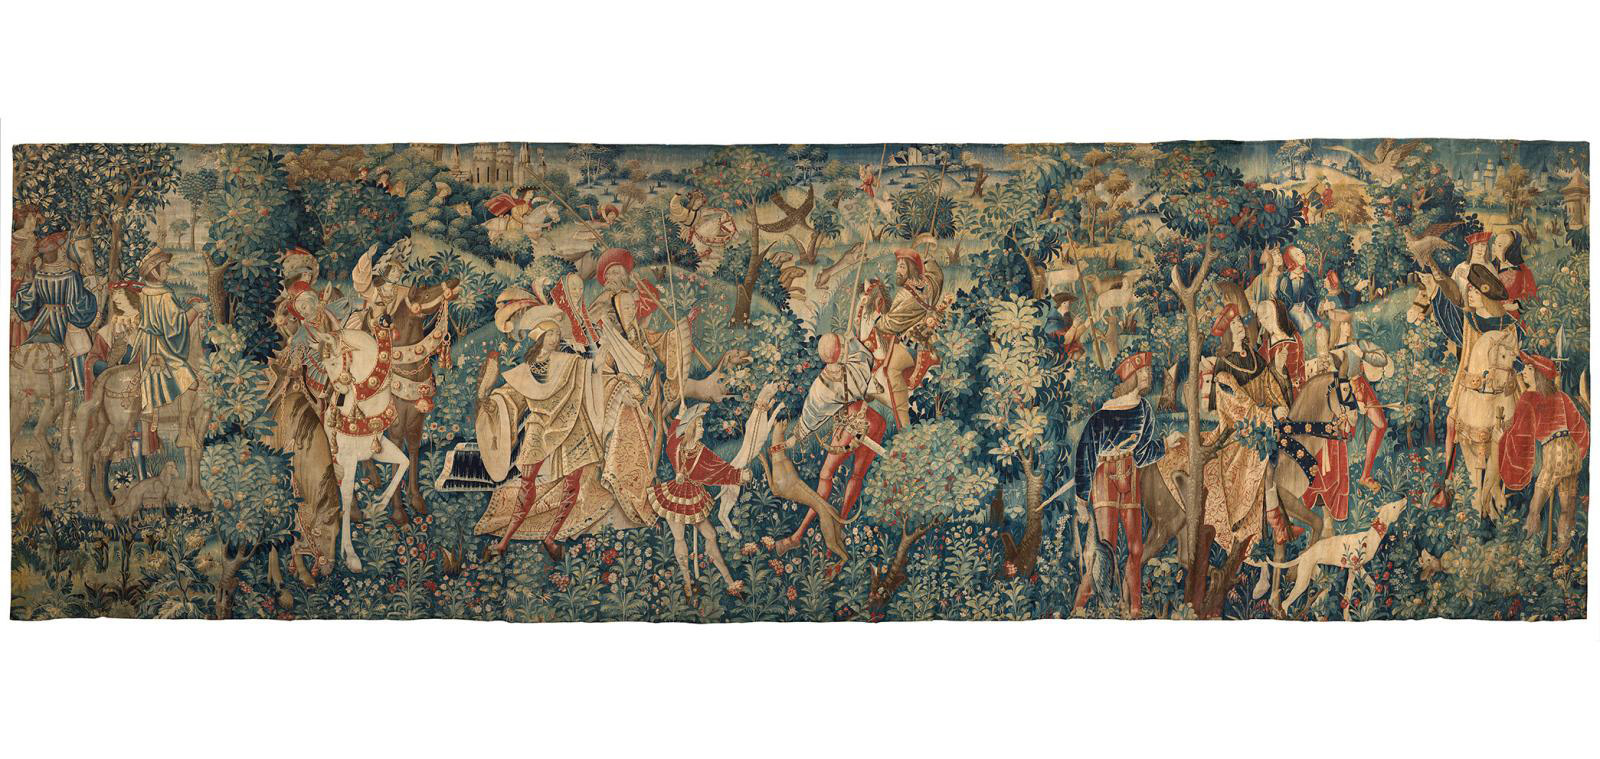 A Masterpiece of 16th-Century European Tapestry Production